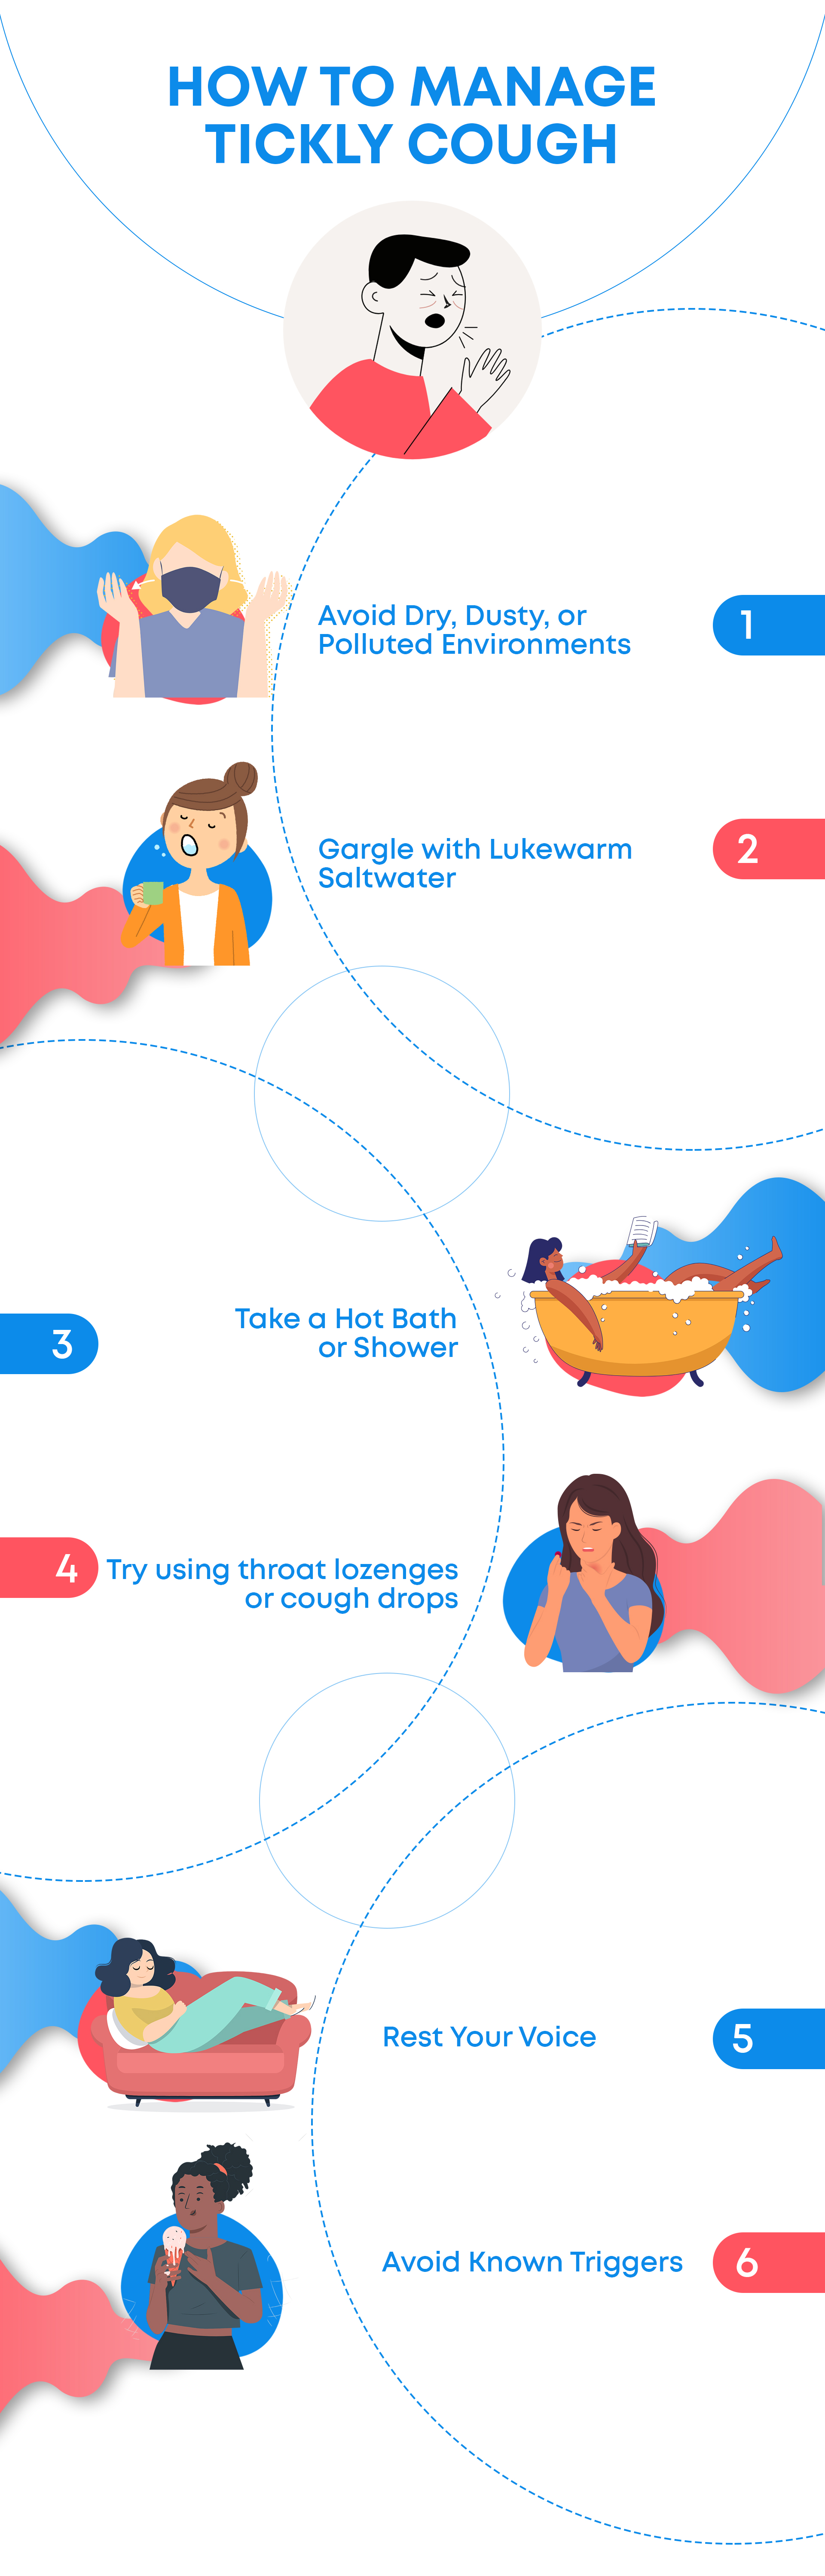 How to manage tickly cough